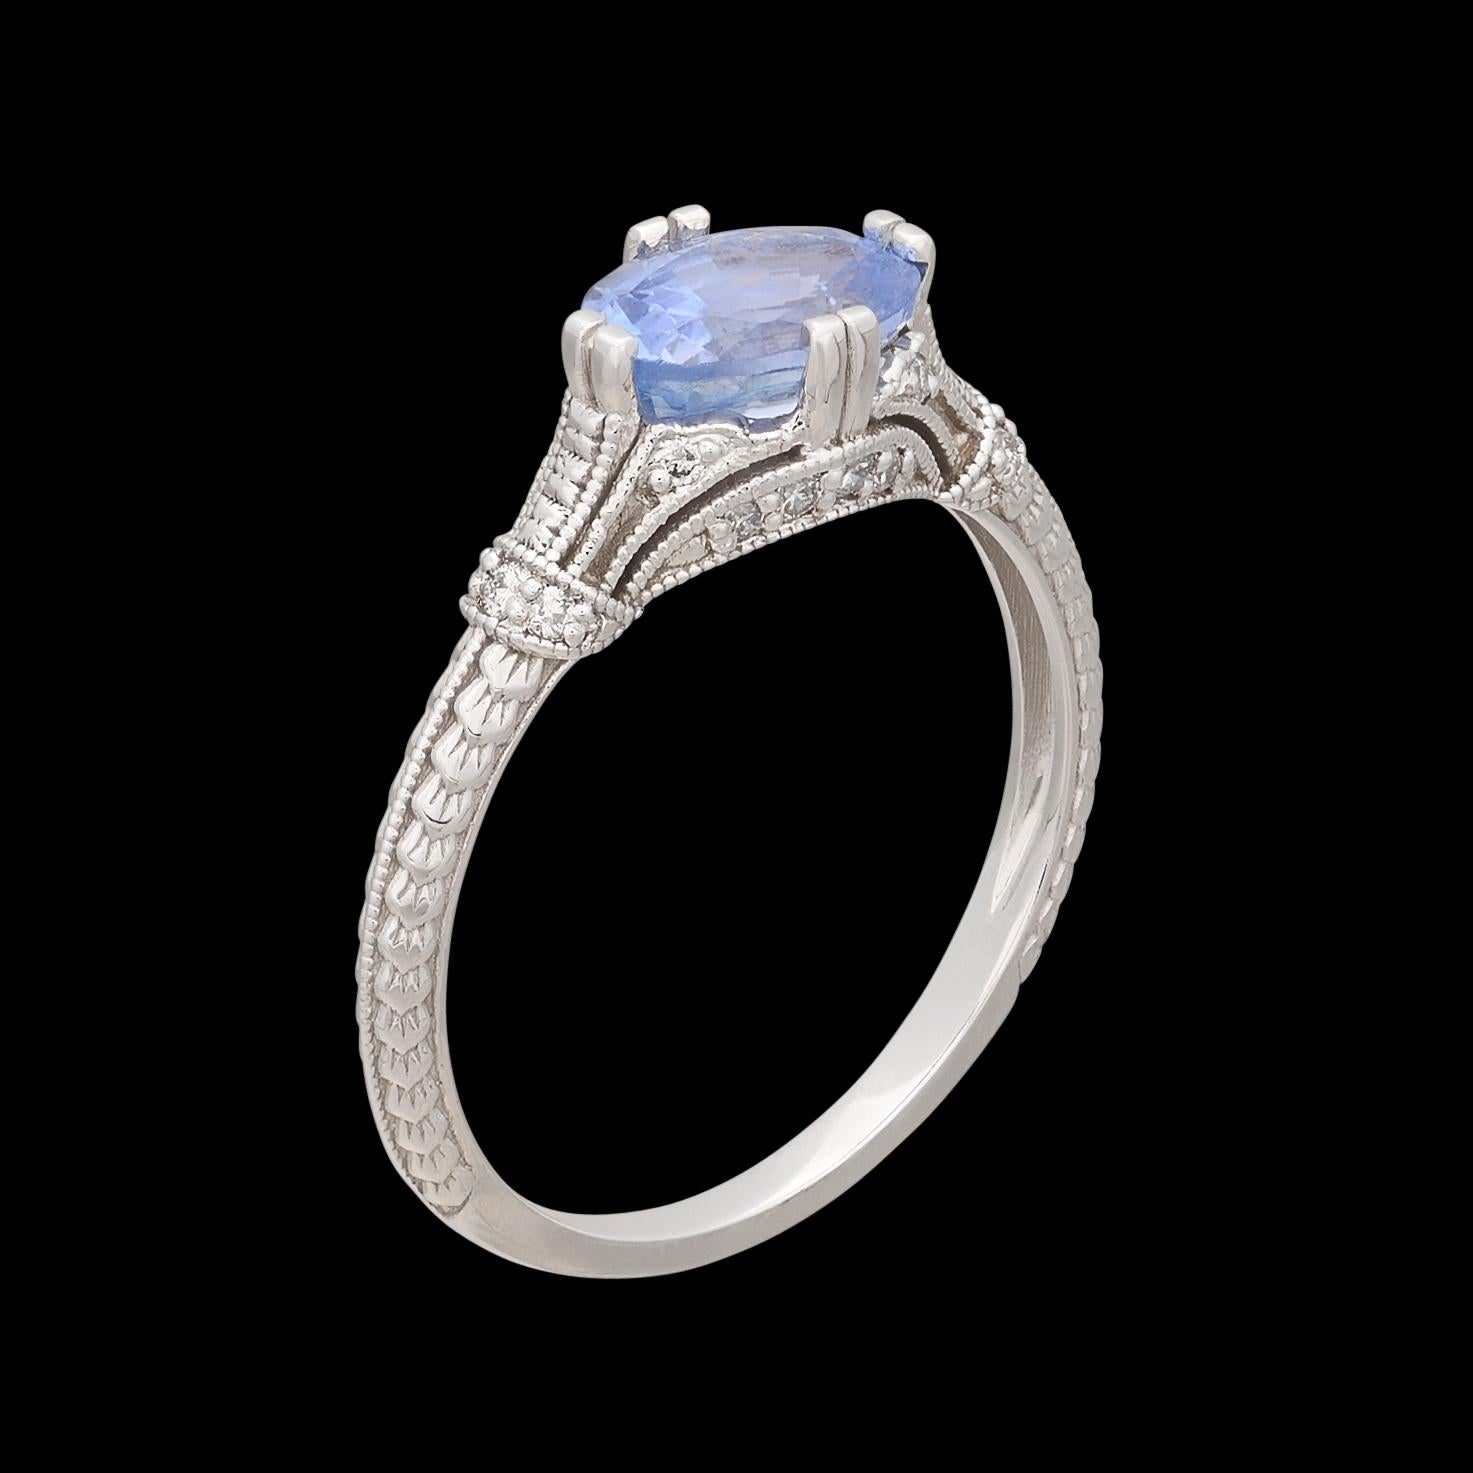 White Gold Ceylon Sapphire & Diamond Ring In Excellent Condition For Sale In San Francisco, CA